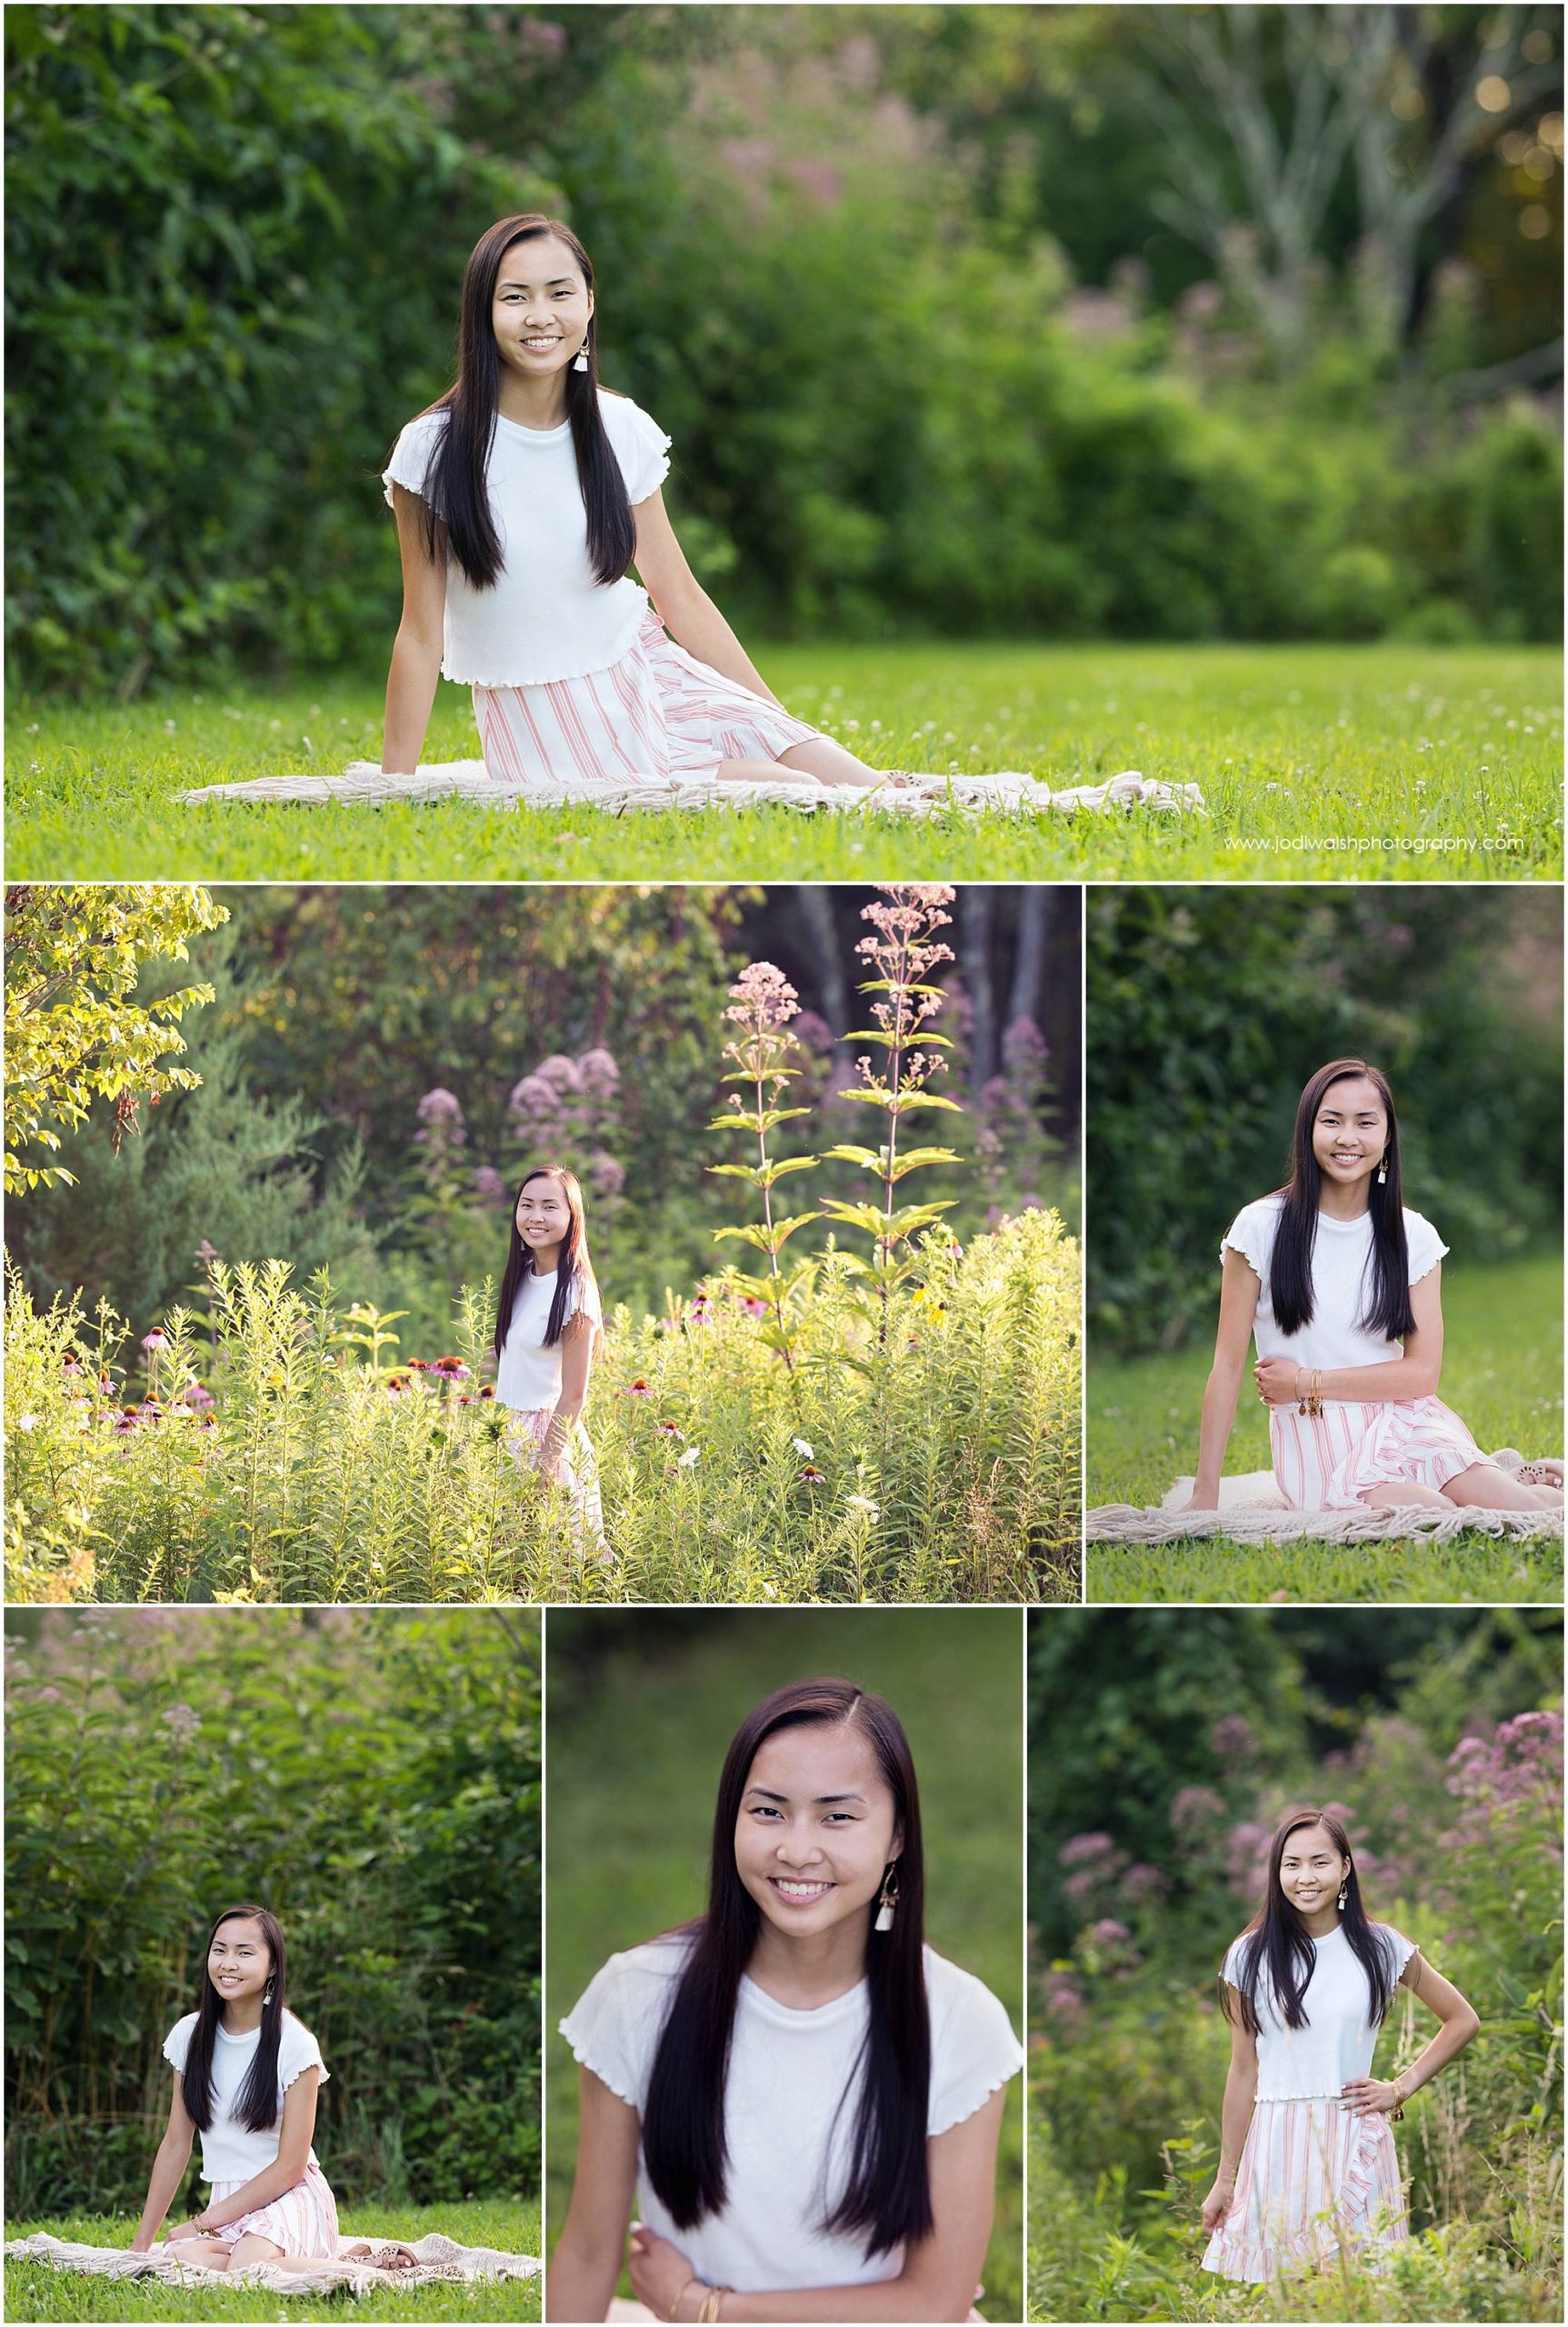 Collage of images of a senior portrait session. Senior girl is wearing a white top and pink striped skirt. She's in a park in the North Hills with tall glasses and wildflowers.